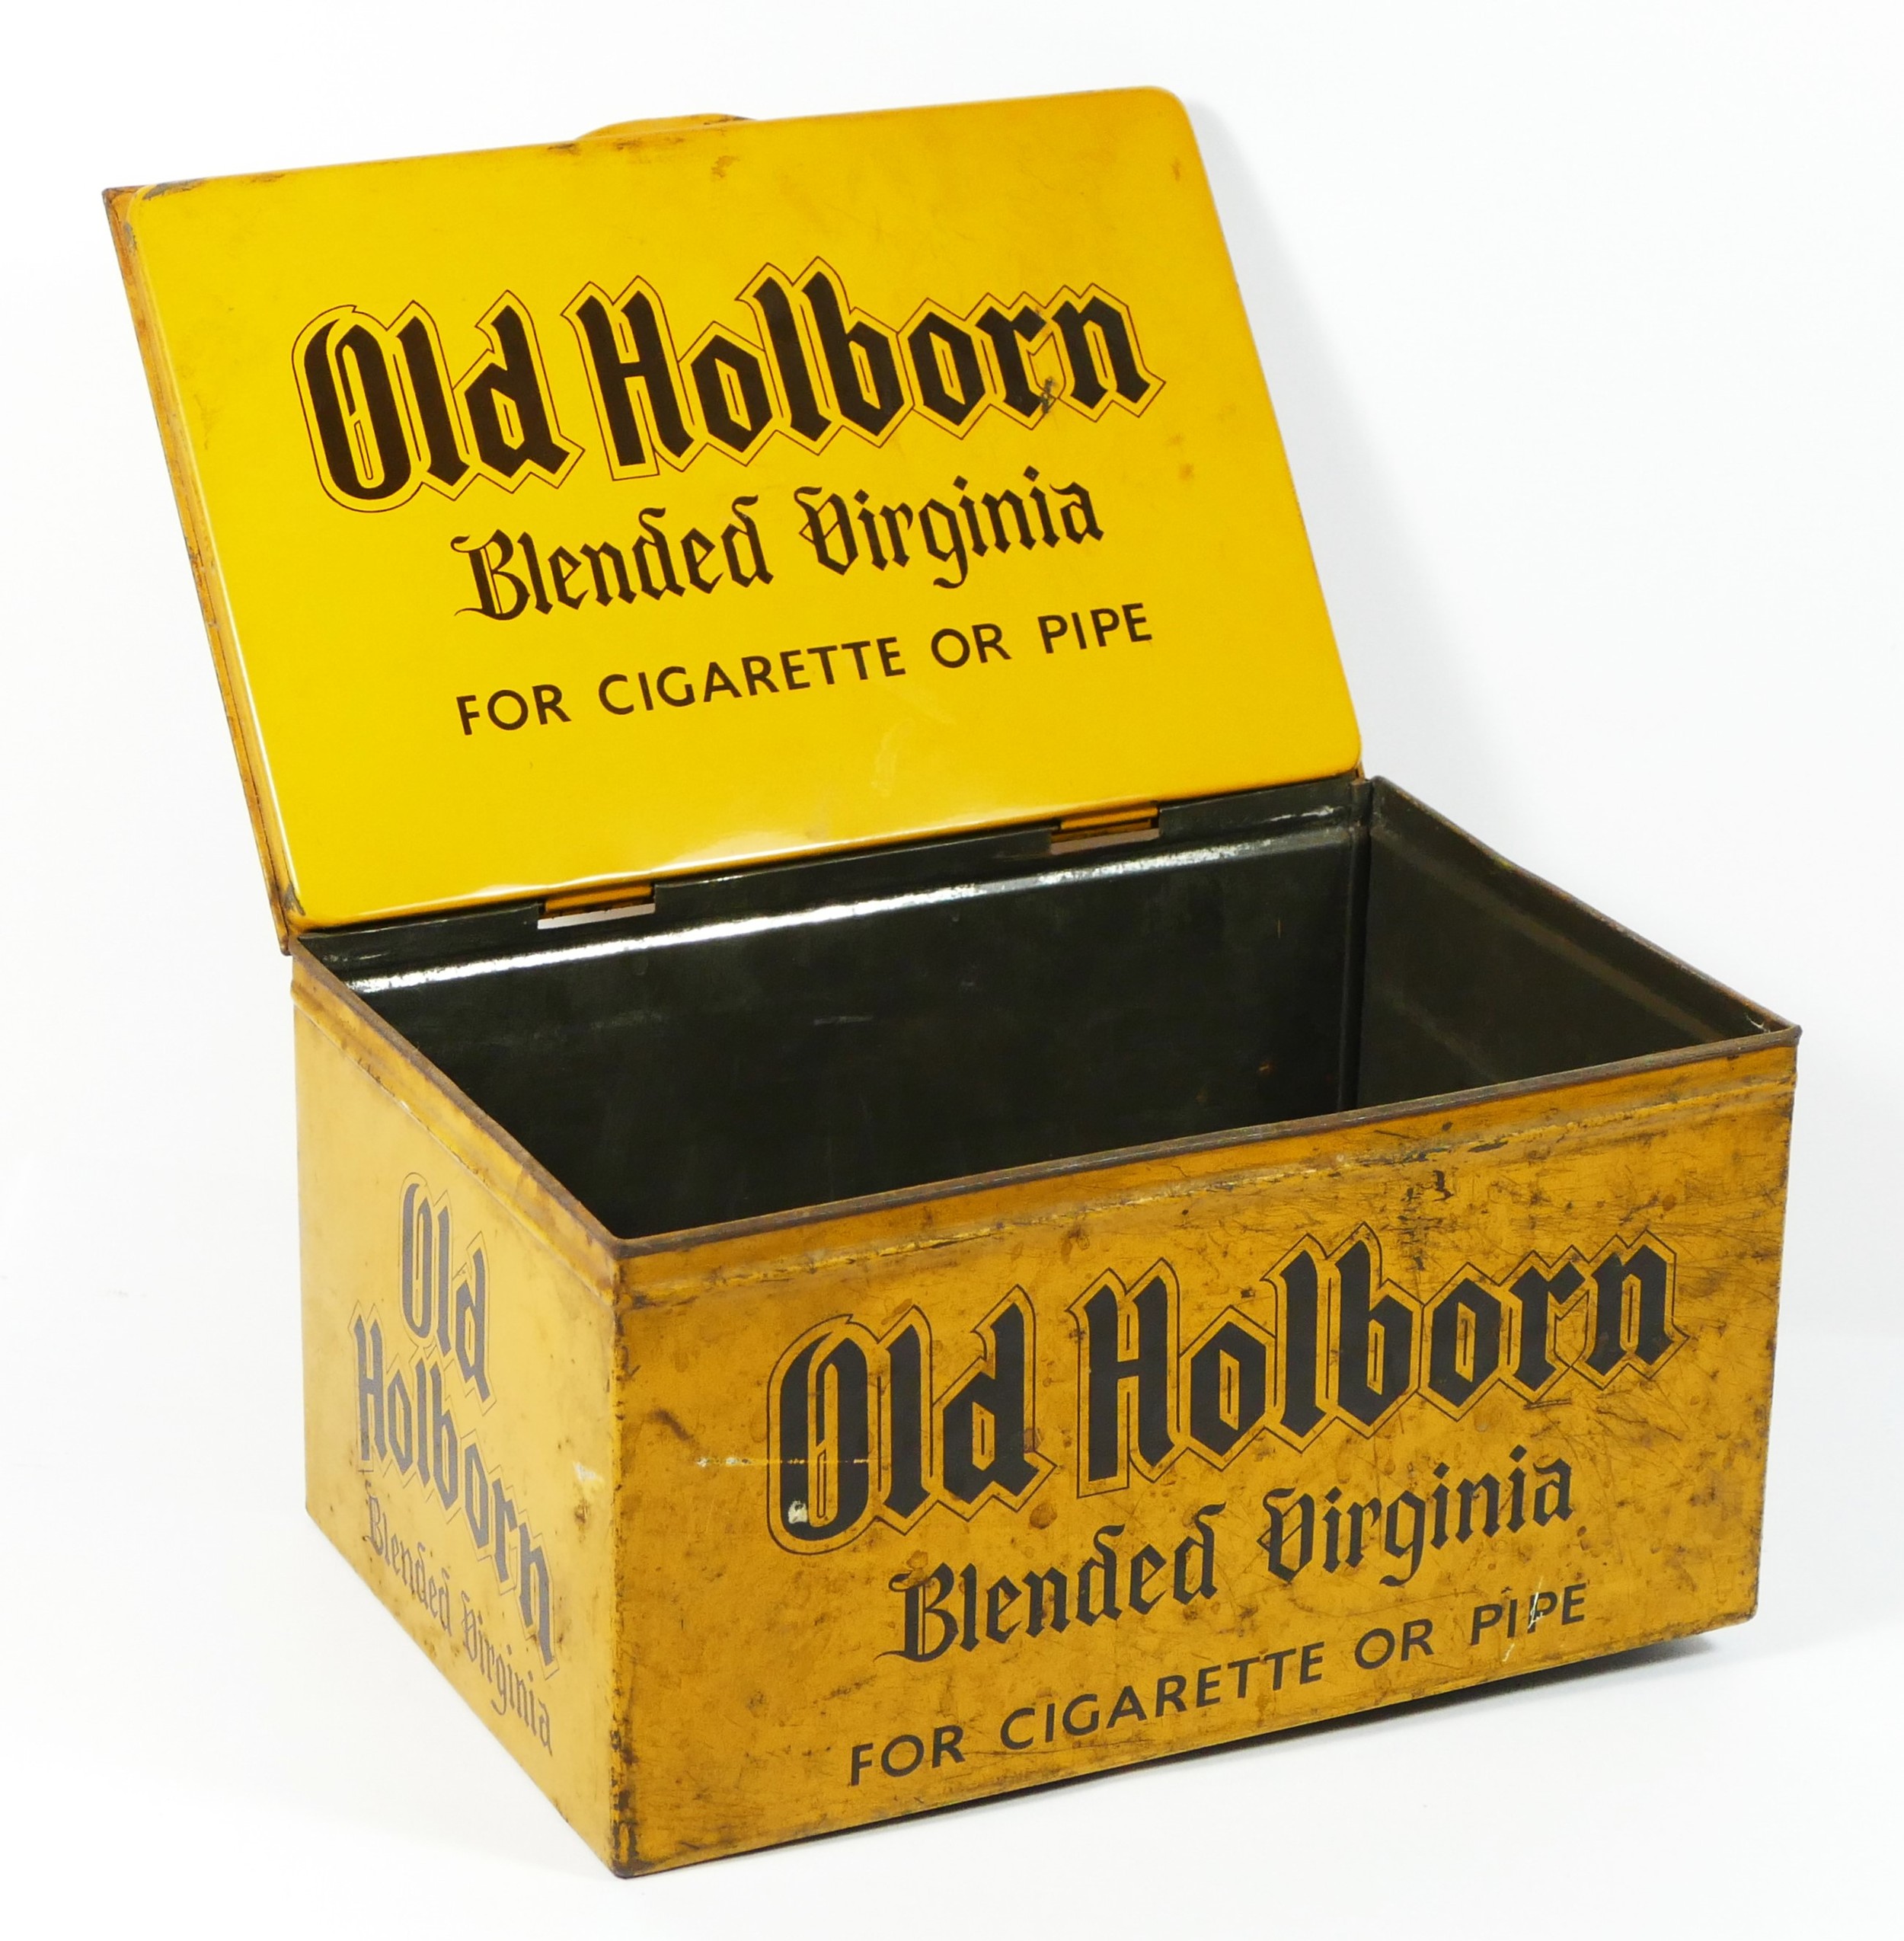 Old Holborn, Blended Virginia, tobacco tin, 4.5 x 22 x 11cm. - Image 3 of 3